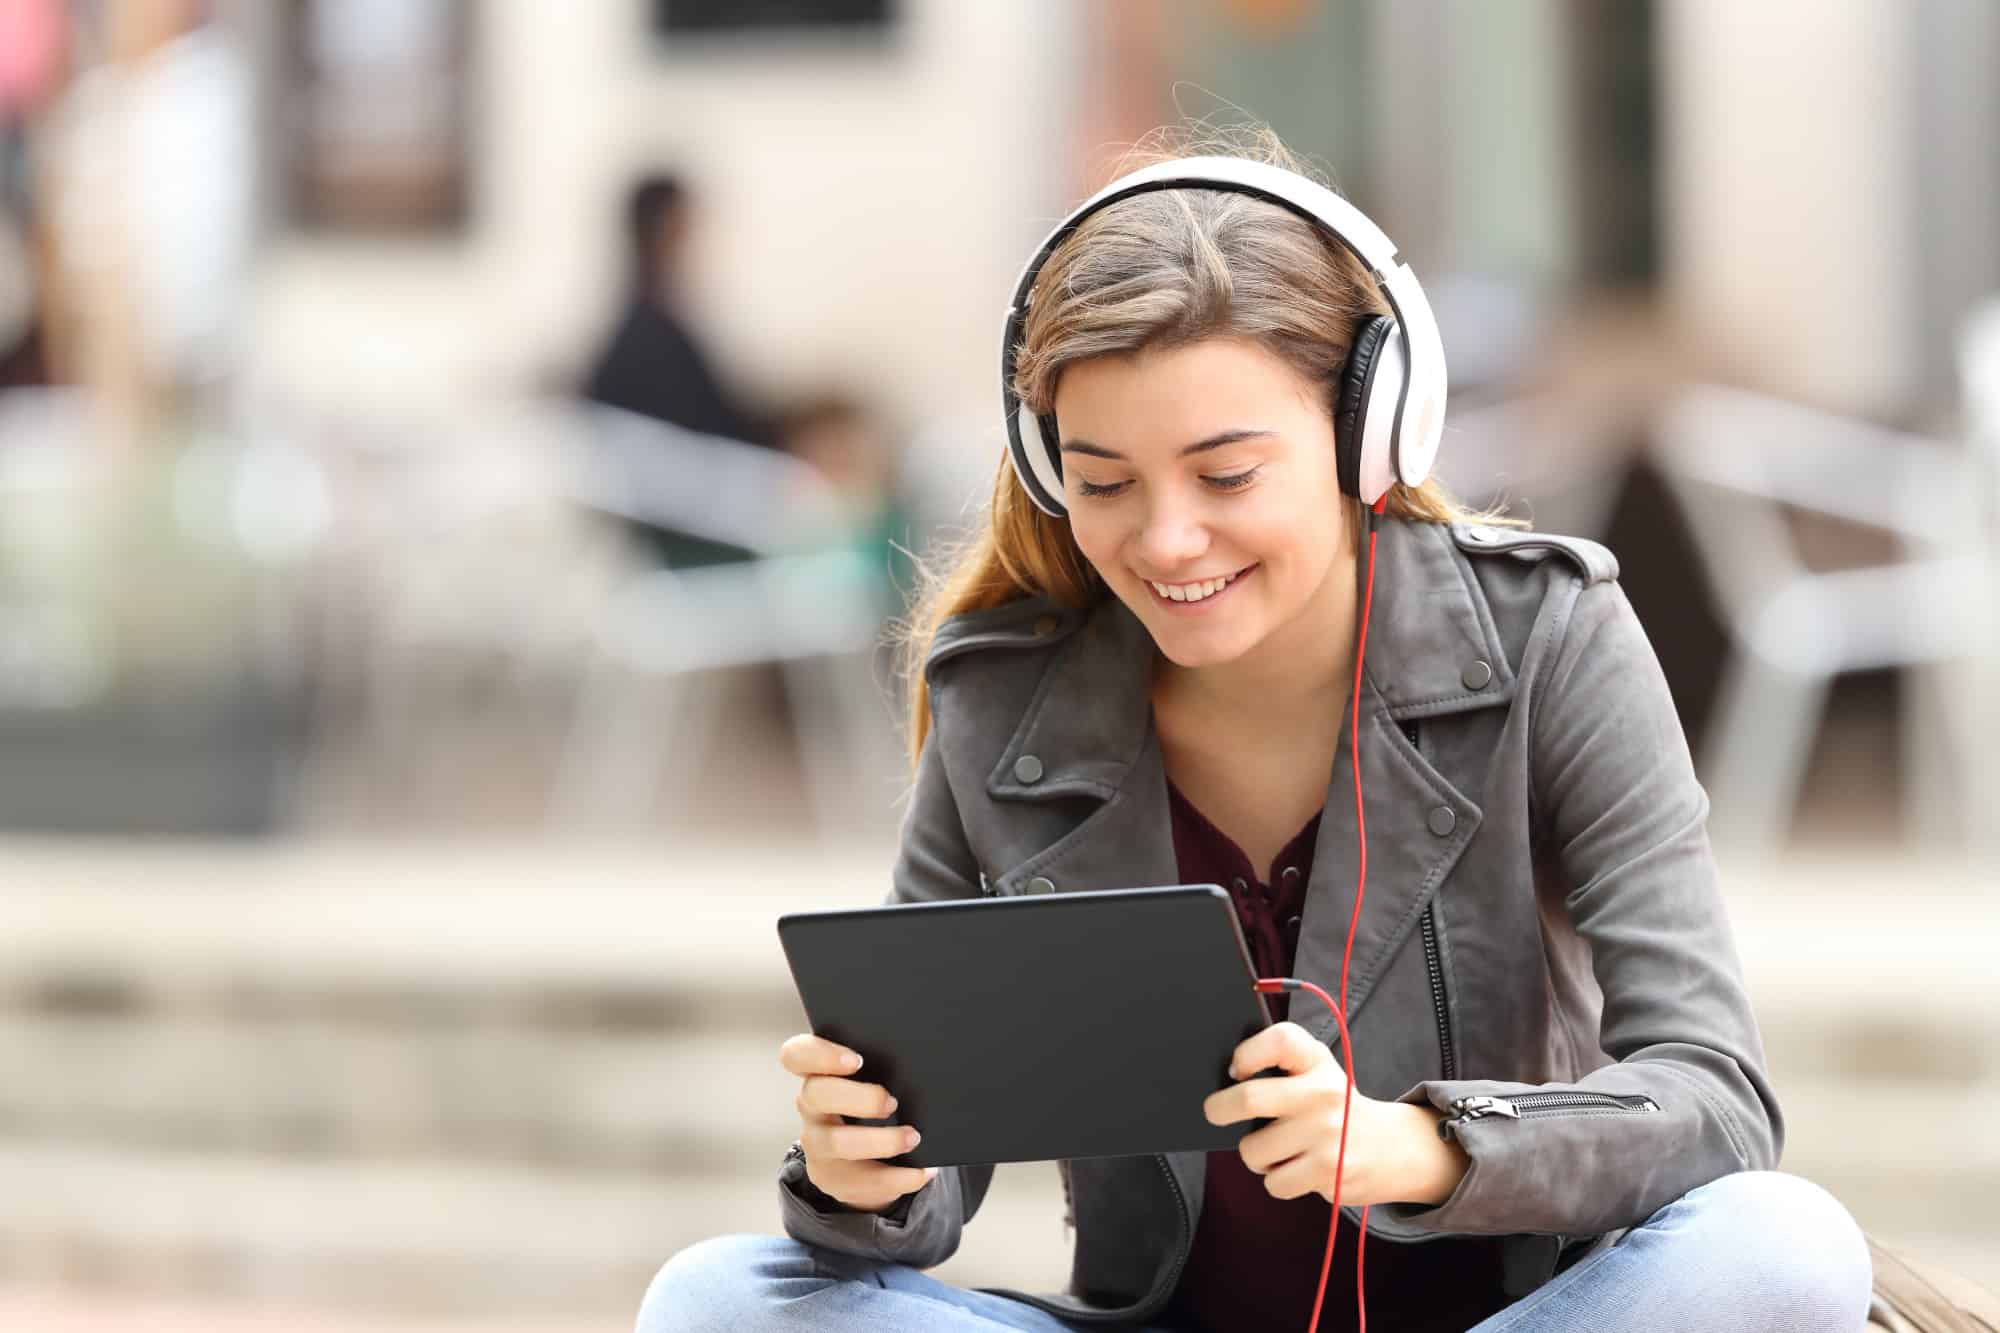 Girl learning on line with a tablet and headphones